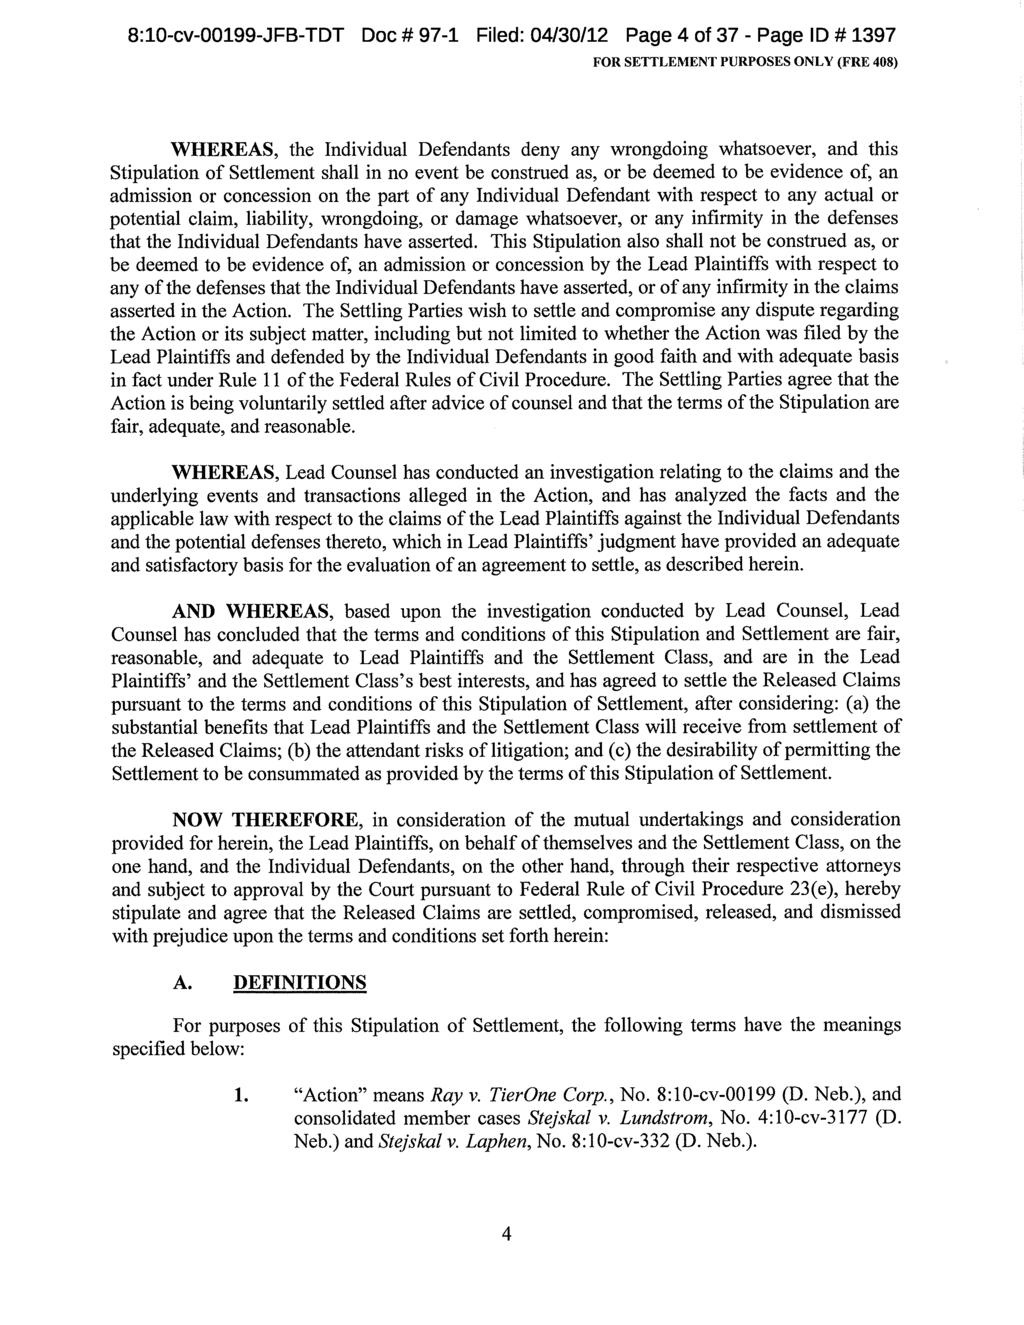 8:10-cv-00199-JFB-TDT Doc # 97-1 Filed: 04/30/12 Page 4 of 37 - Page ID # 1397 WHEREAS, the Individual Defendants deny any wrongdoing whatsoever, and this Stipulation of Settlement shall in no event